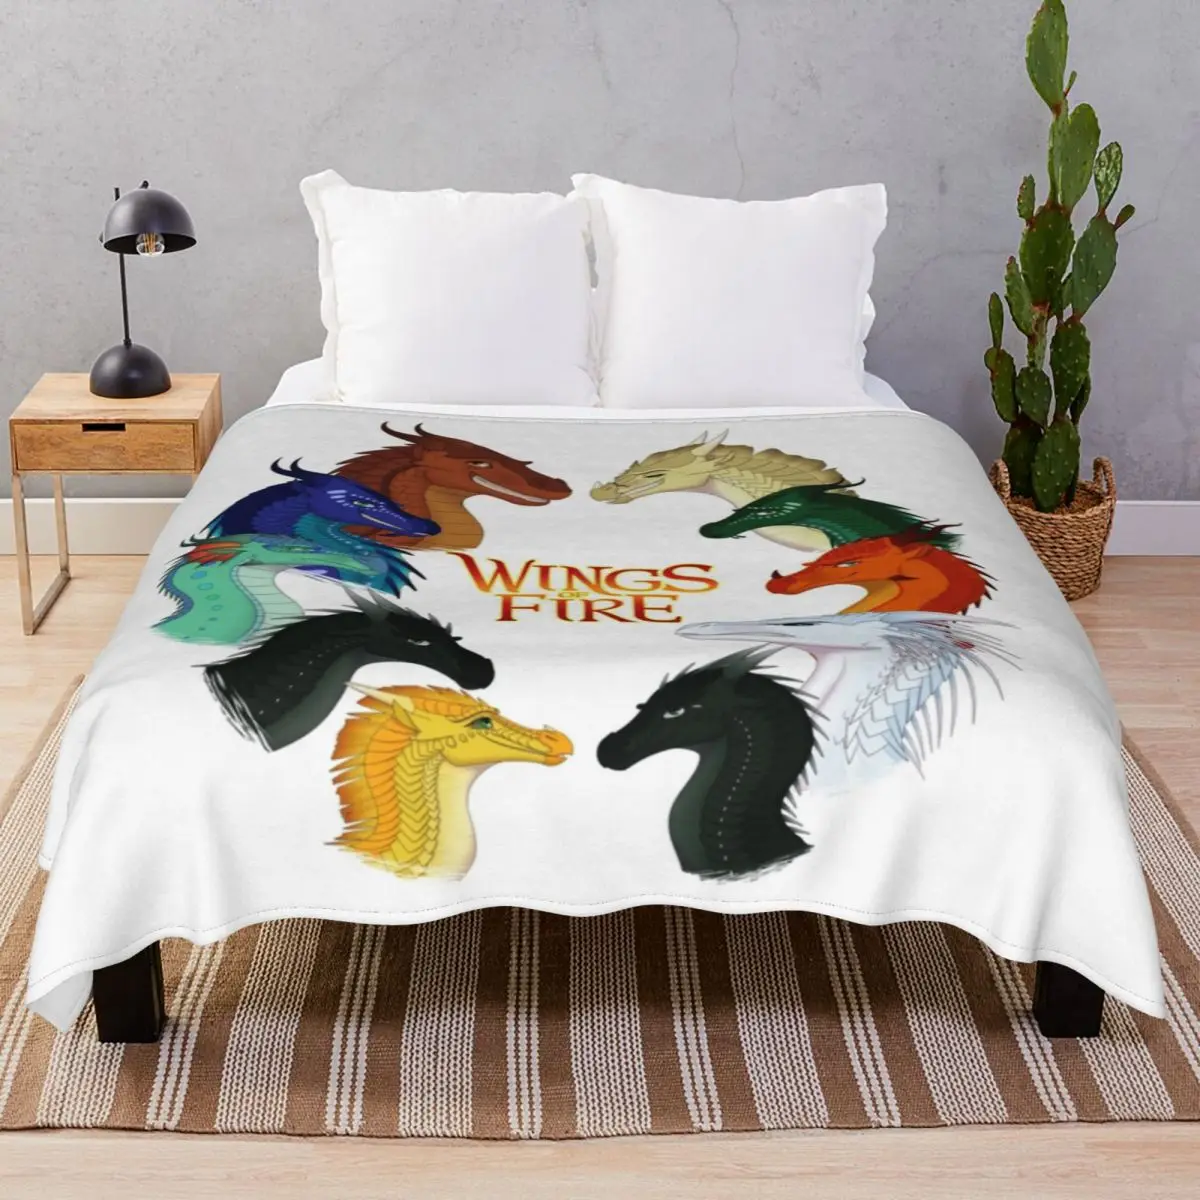 Wings Of Fire All Together Blankets Coral Fleece Autumn/Winter Lightweight Thin Throw Blanket for Bed Home Couch Travel Office